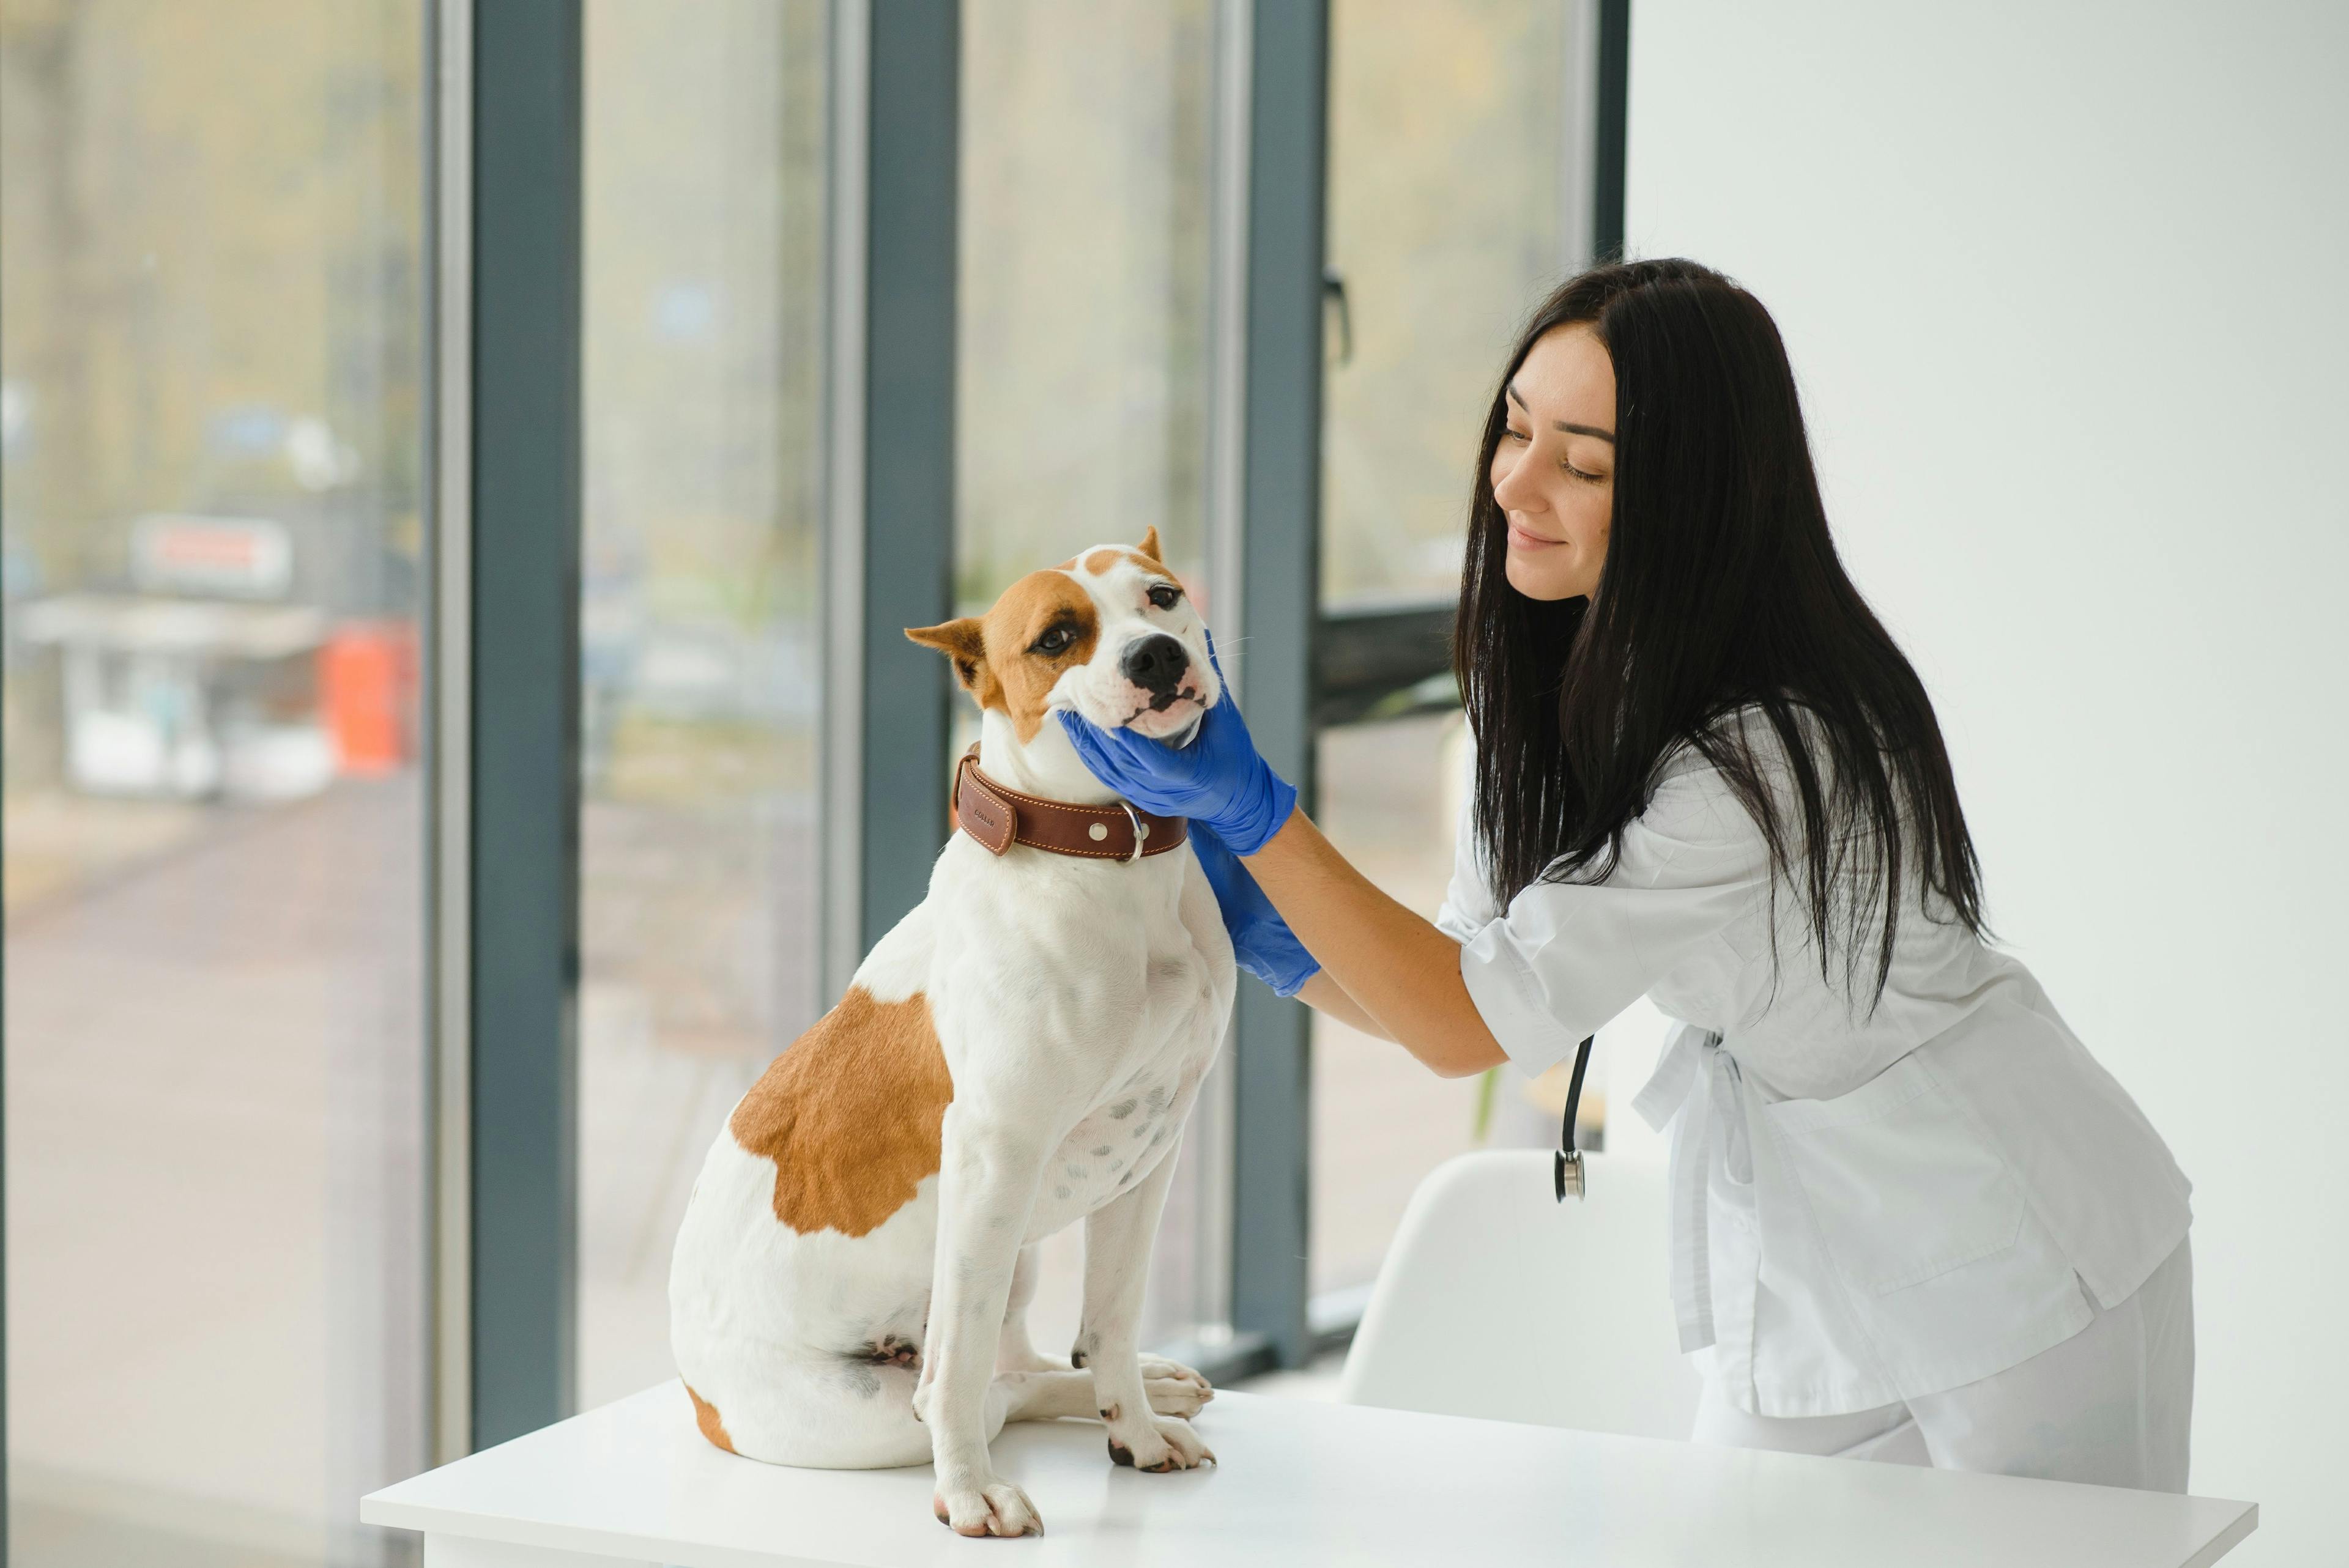 Veterinary network eliminates non-compete clauses